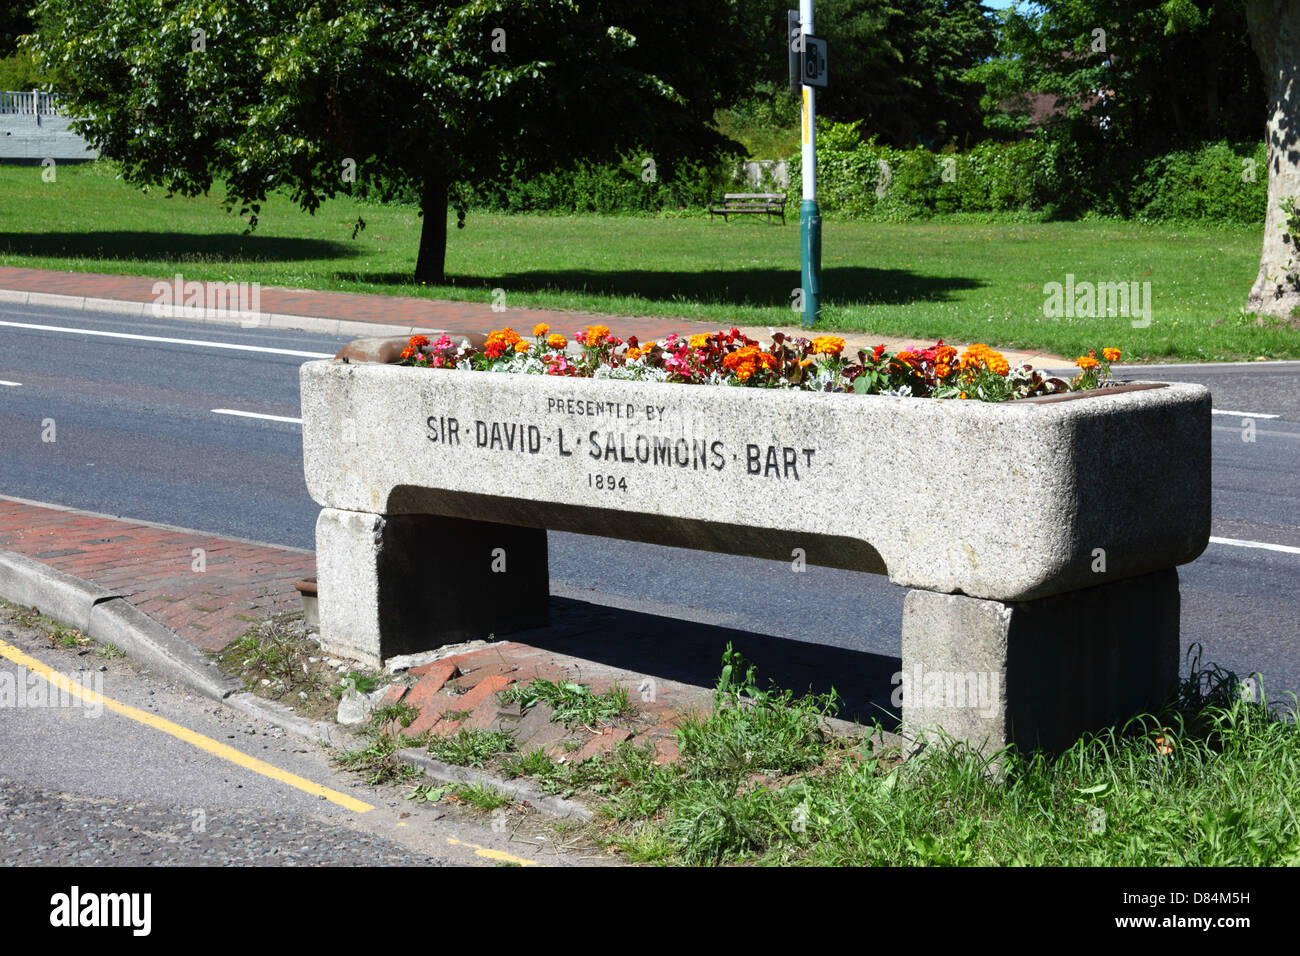 Flowers in granite horse drinking trough next to A26, a gift from Sir David Lionel Salomons to Southborough in 1894, Southborough Common, Kent, UK Stock Photo